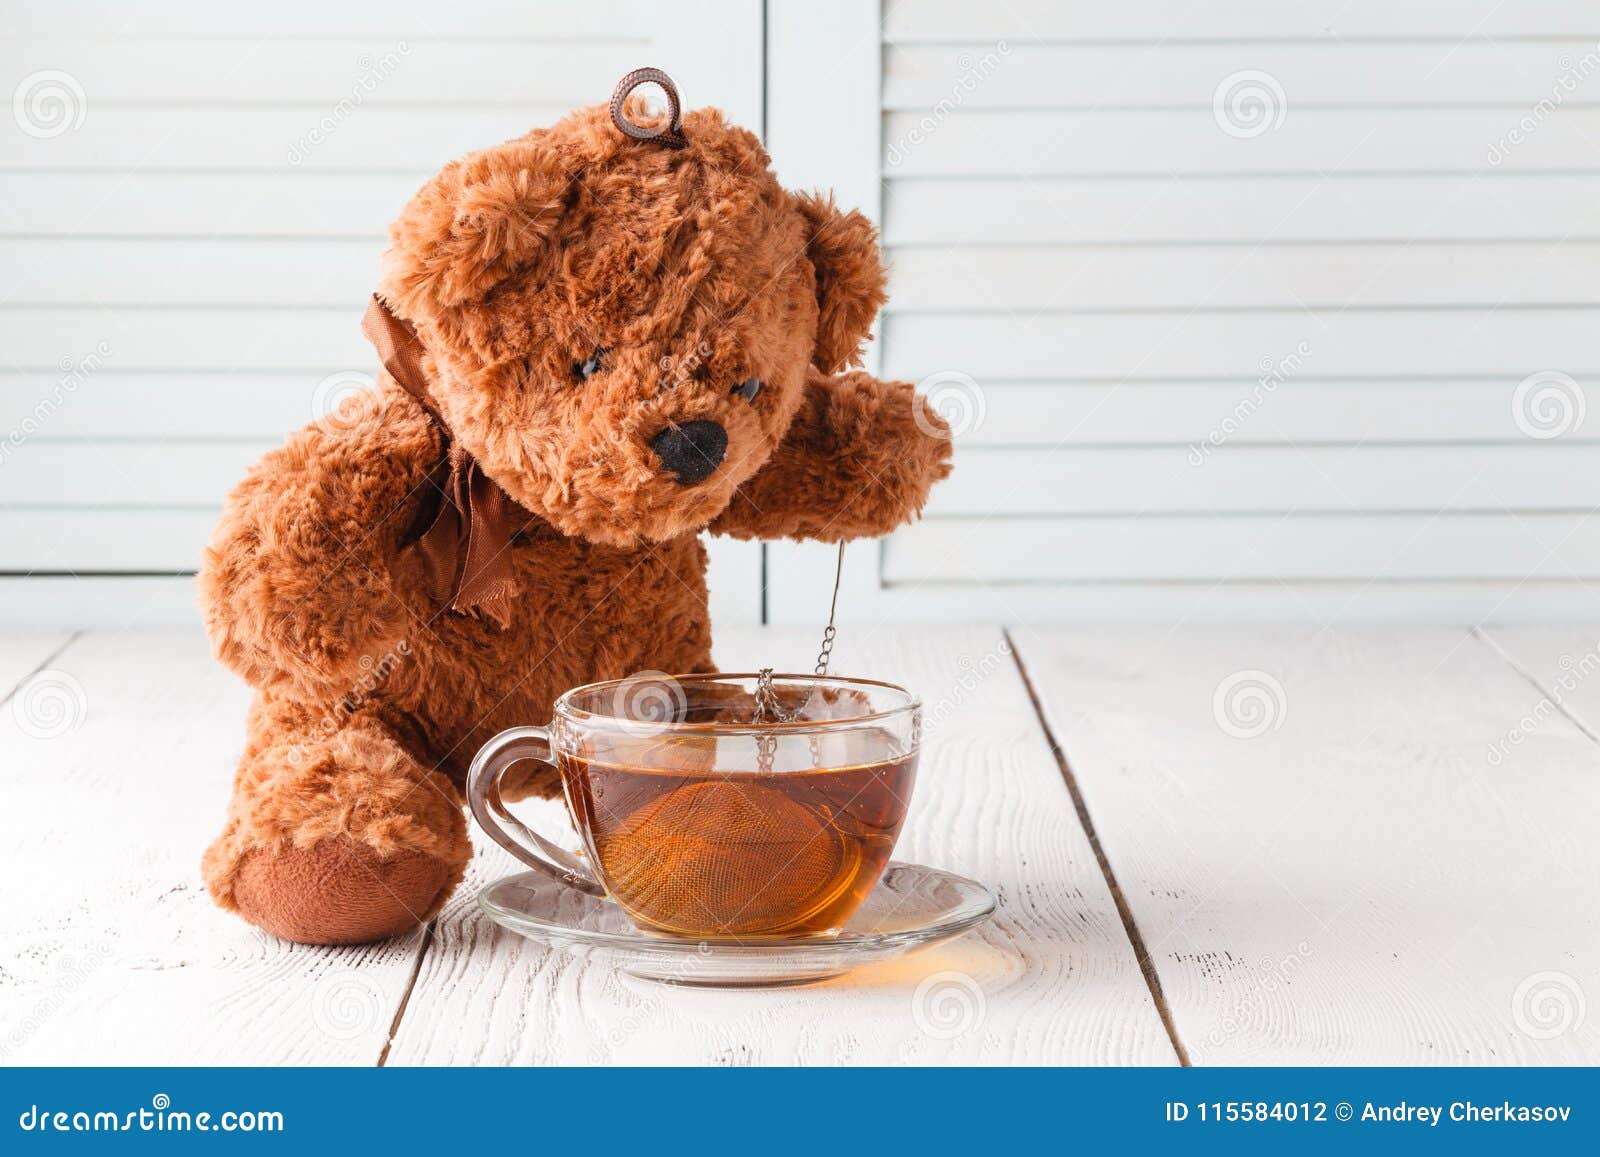 Good Morning With Teddy Bear Stock Photo Image Of Decoration